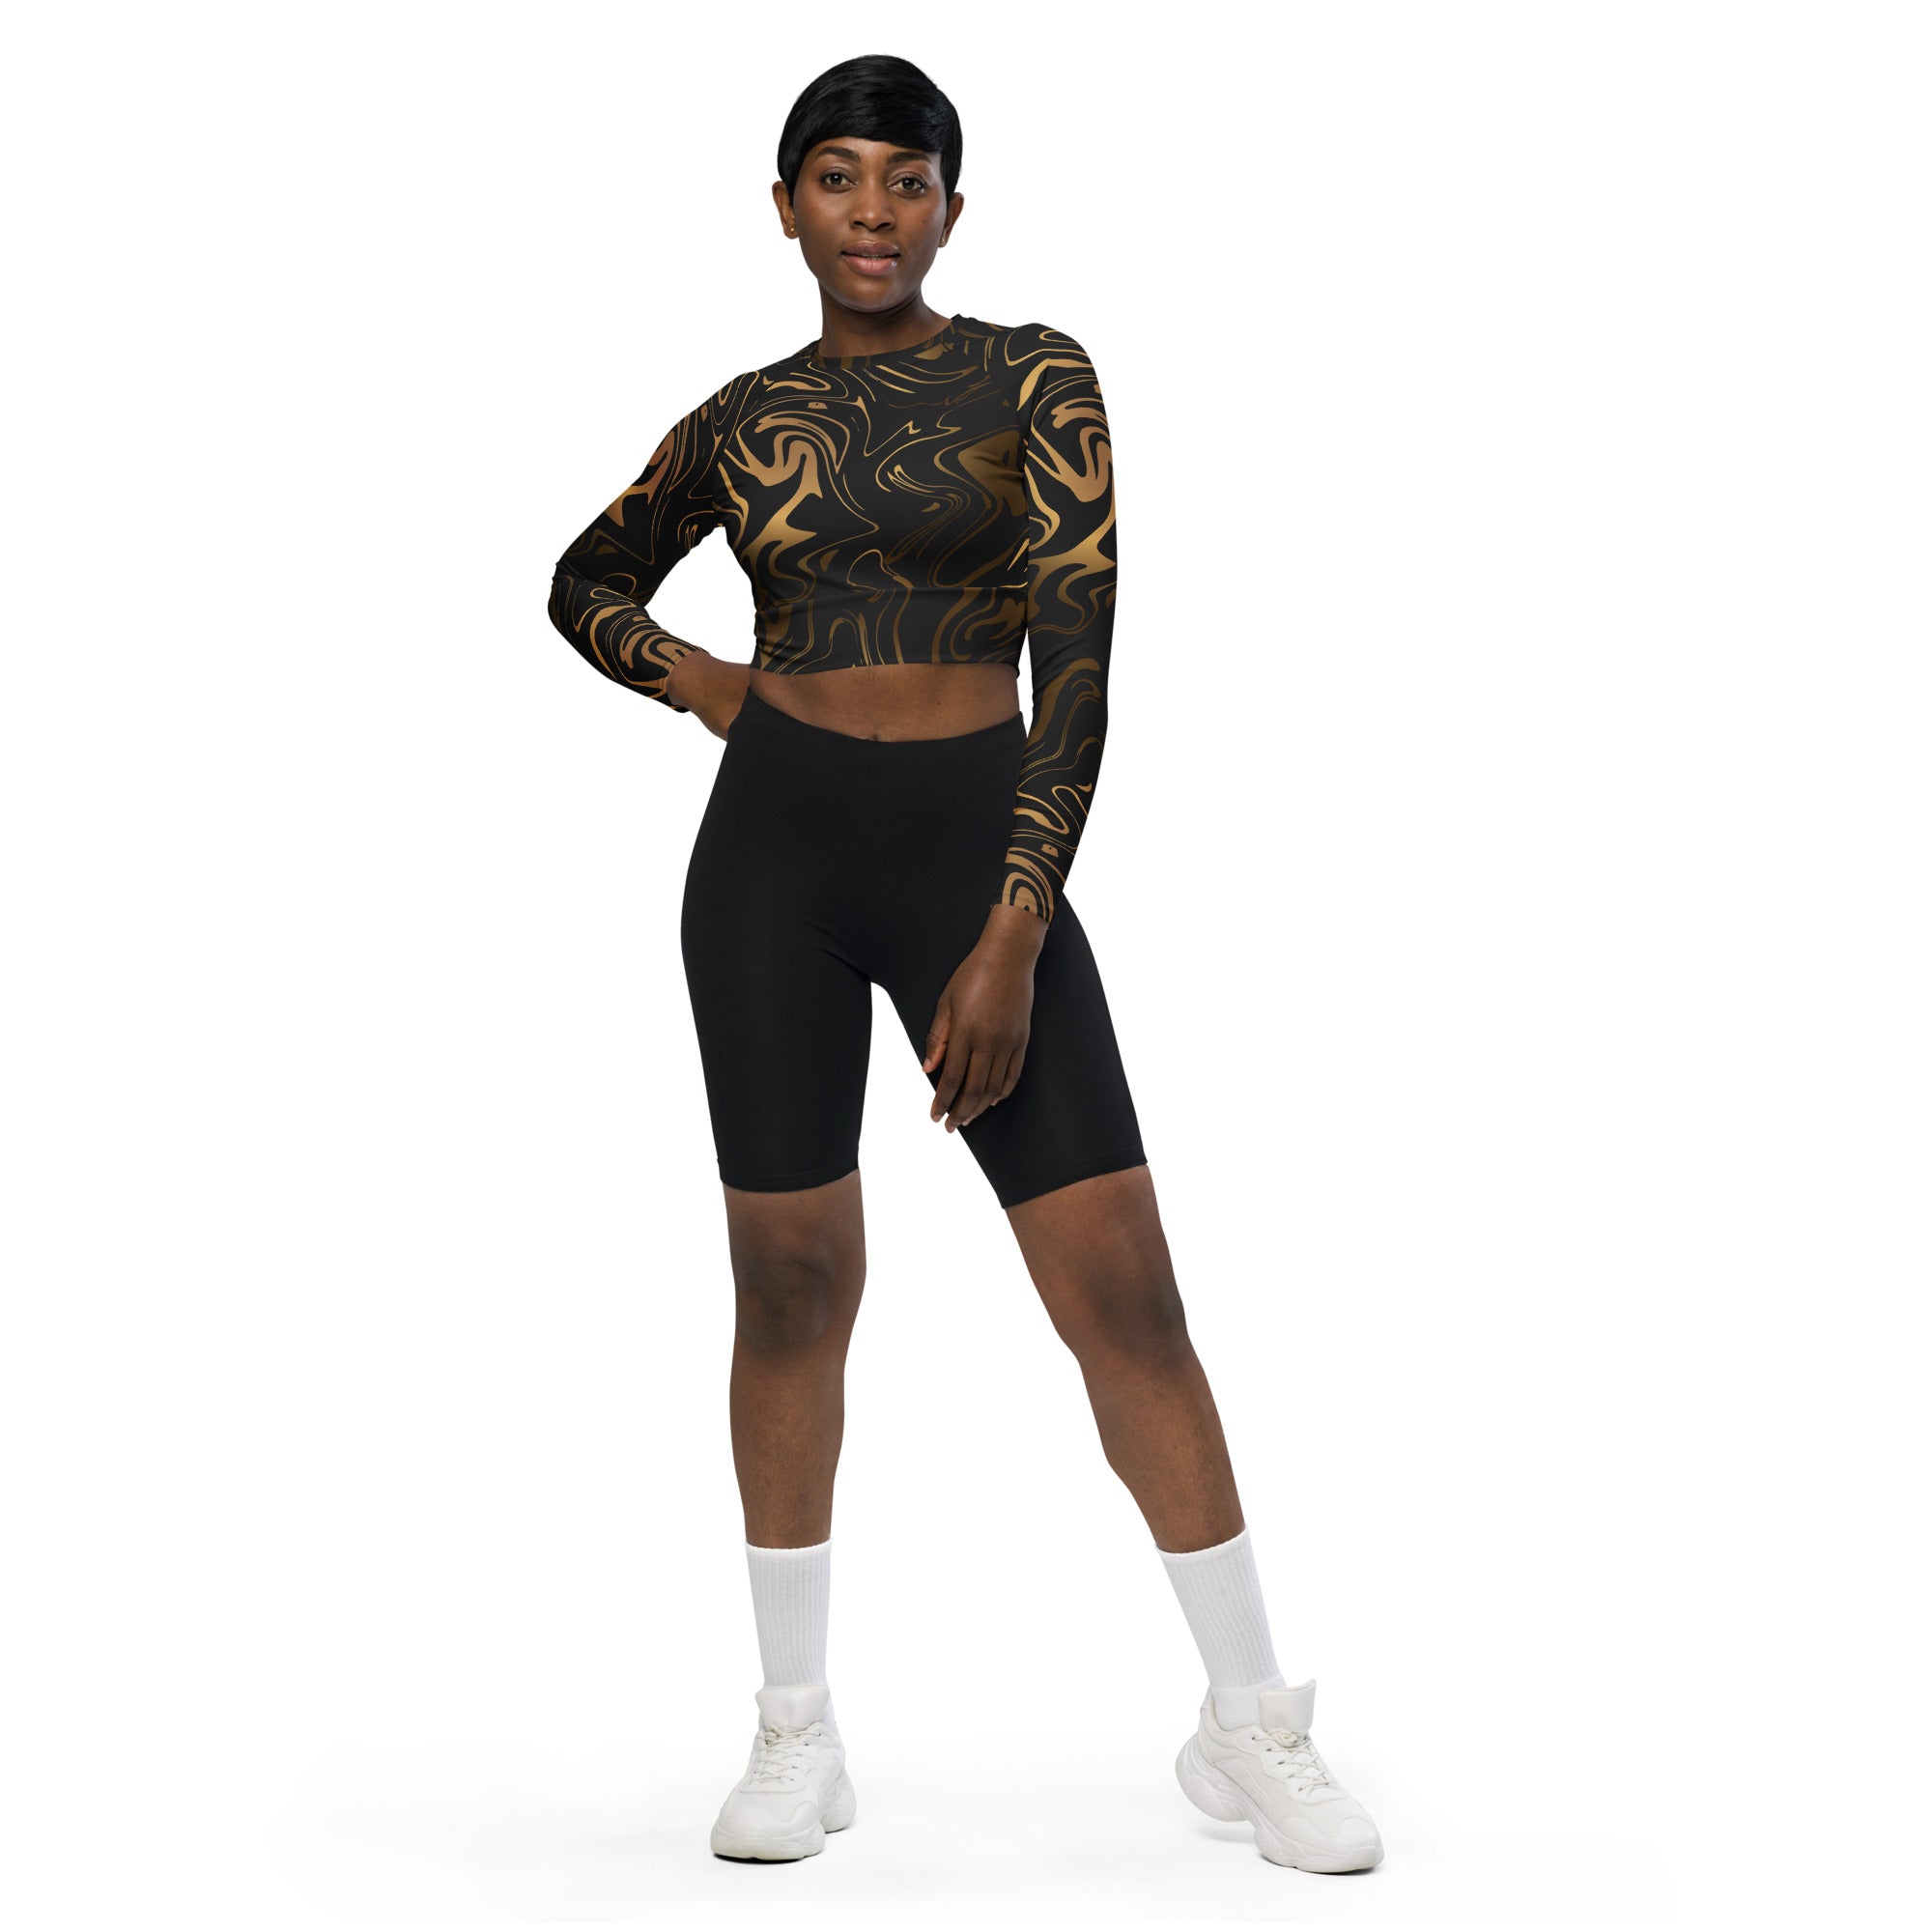 Black & Gold Recycled Long-sleeve Crop Top